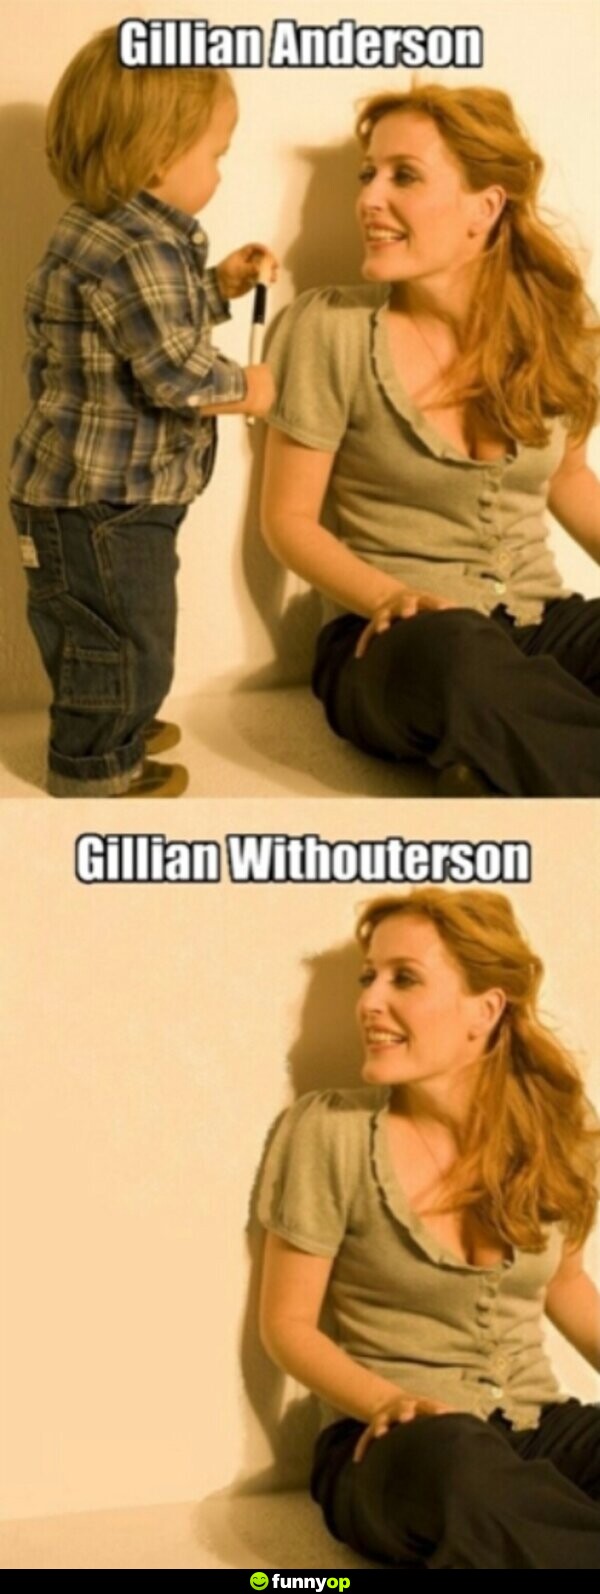 Gillian Anderson. Gillian Withouterson.